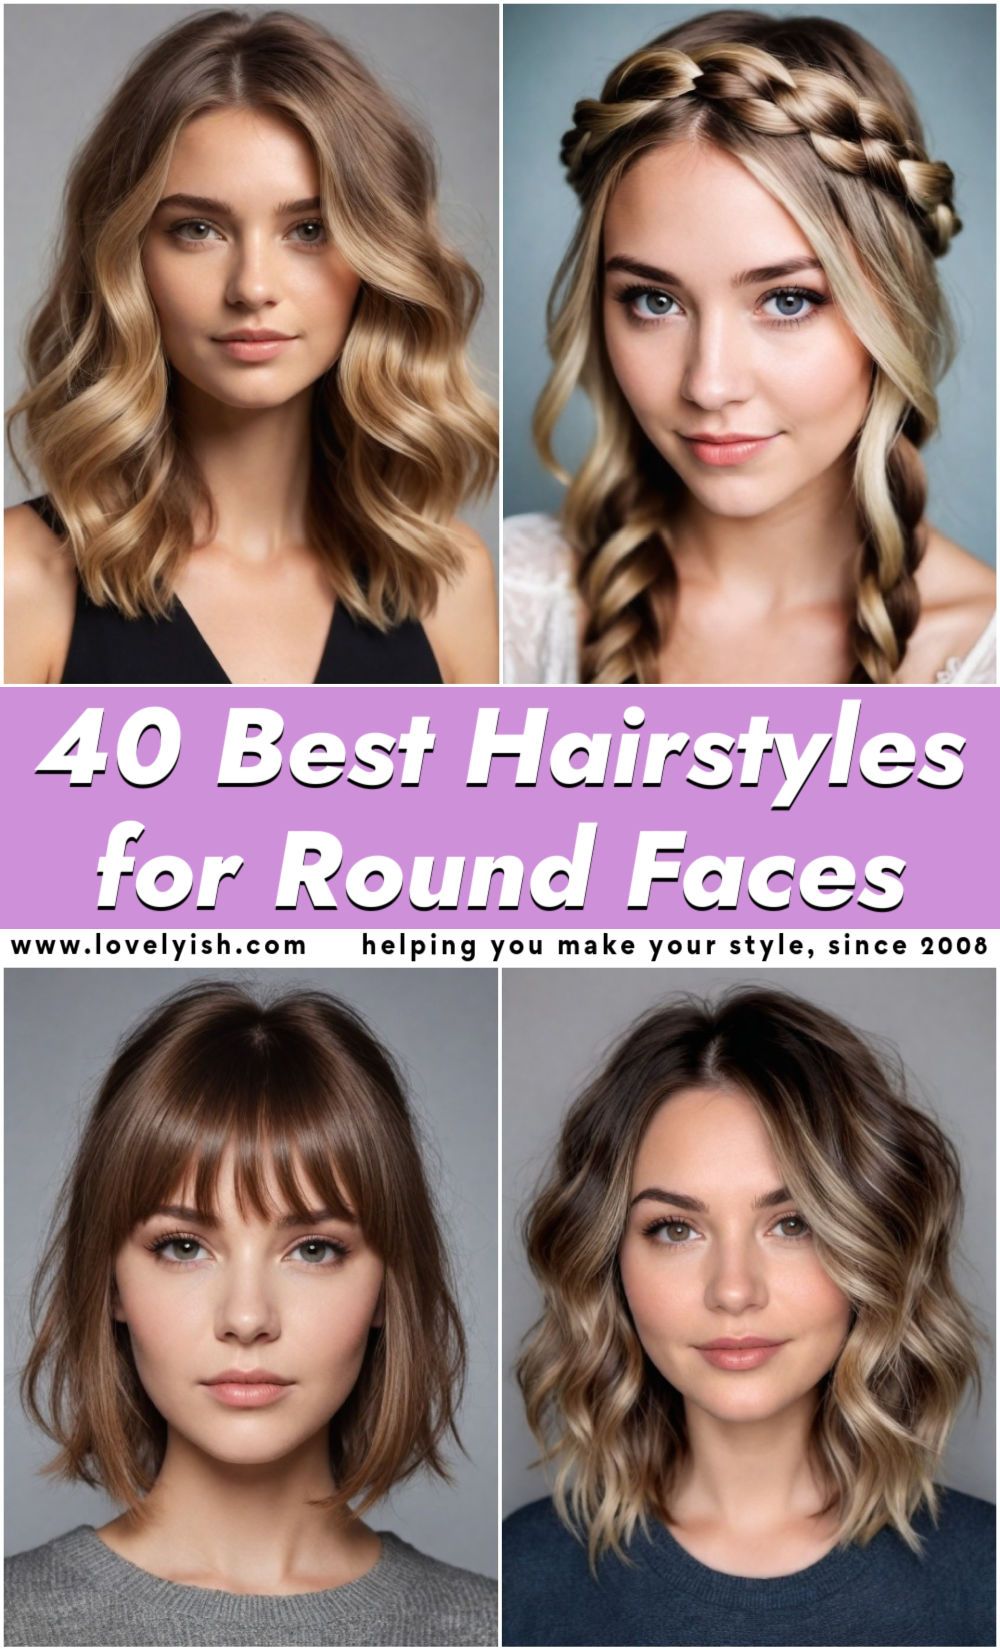 hairstyles for round faces